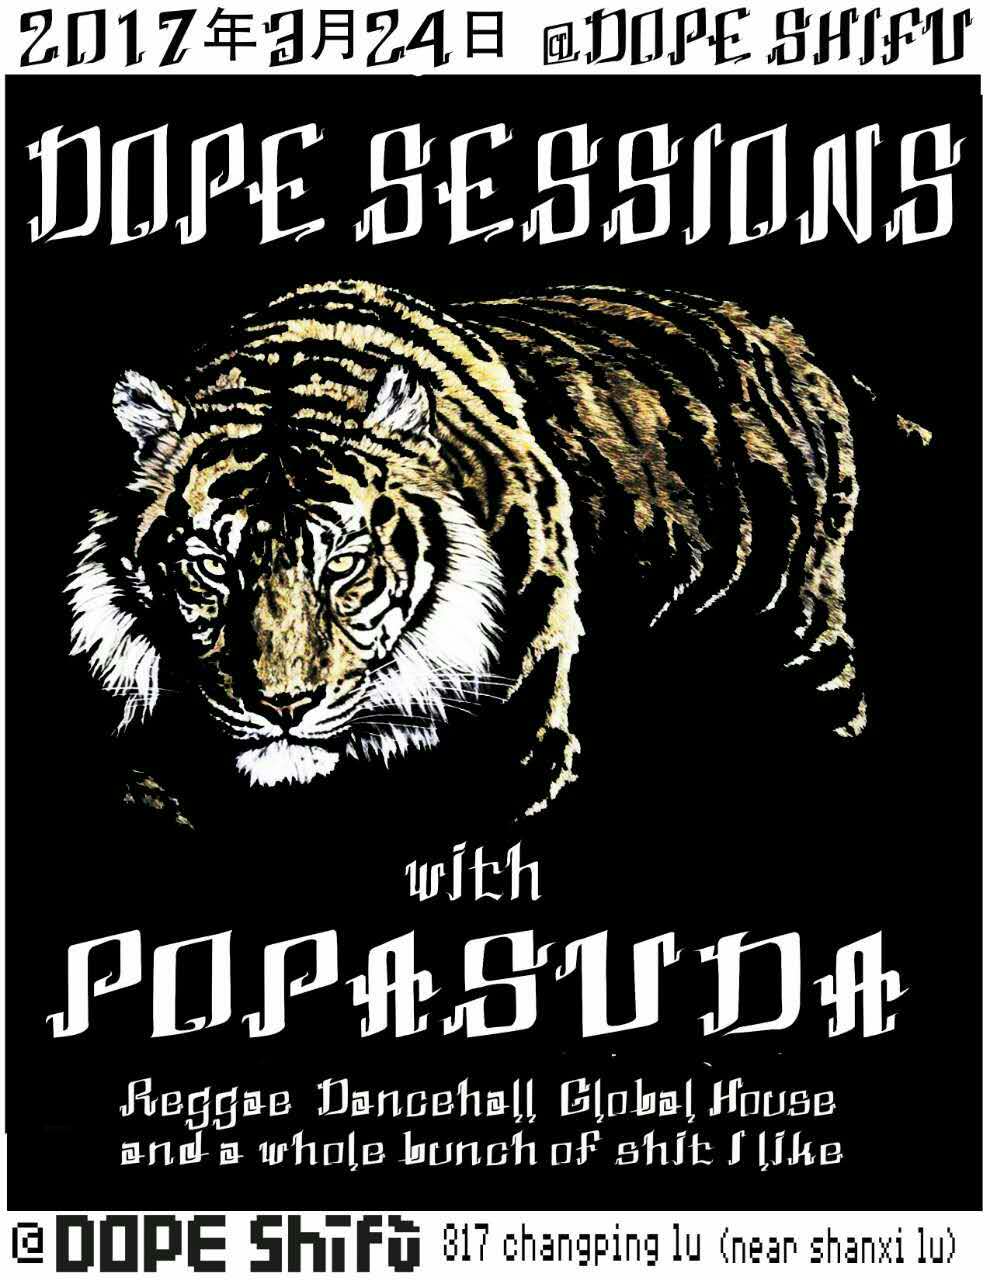 Mar 24: Dope Sessions